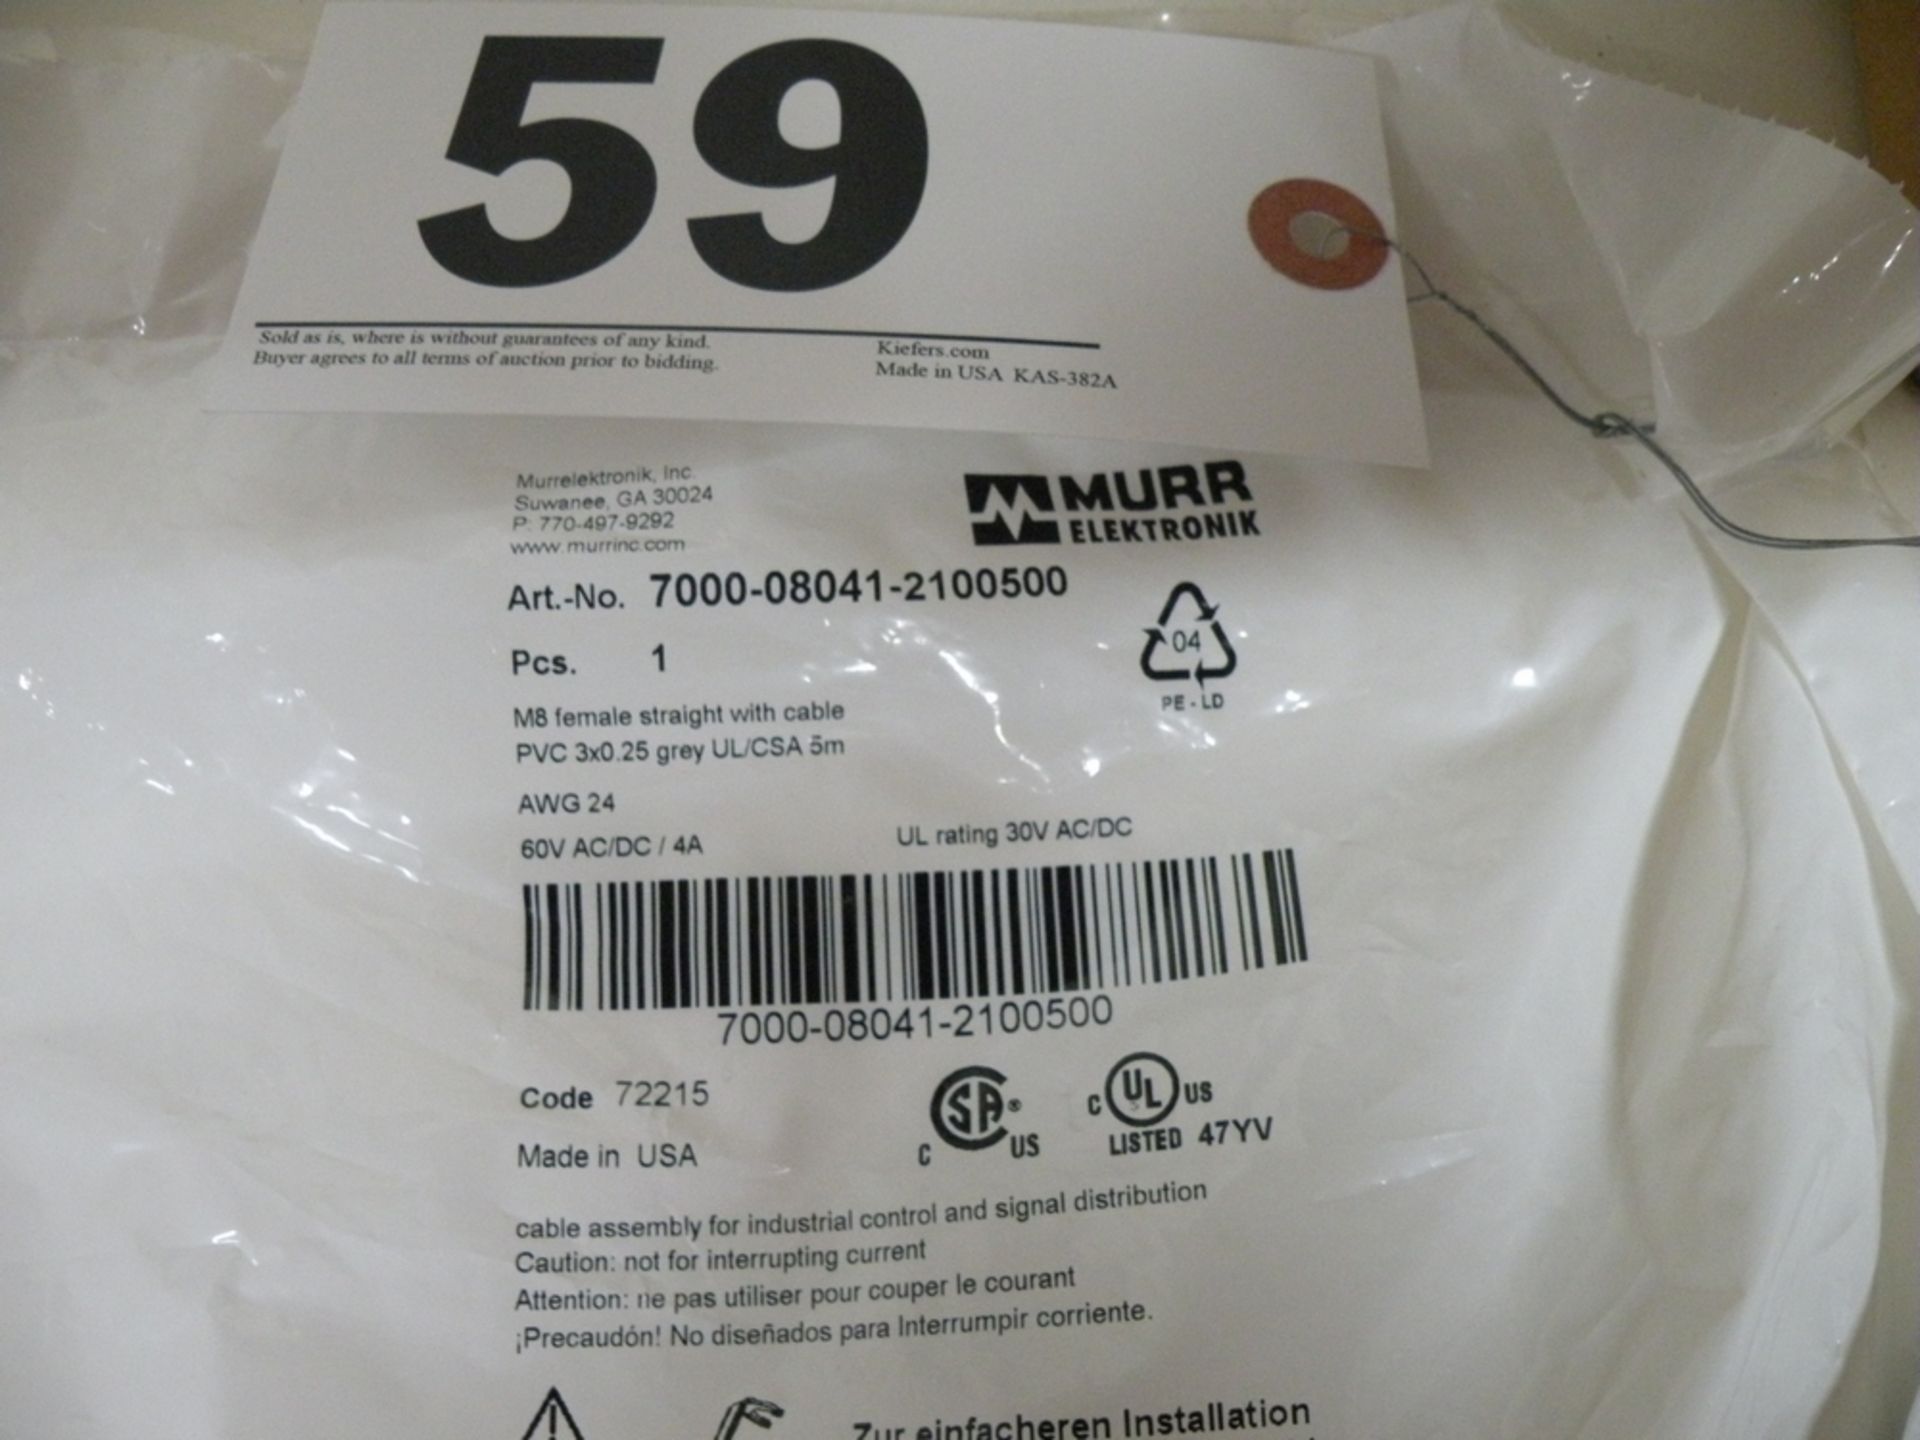 (10) MURR M8 Female Straight with Cable, #7000-08041-2100500, New In Box (S Fulton, TN) - Image 3 of 3